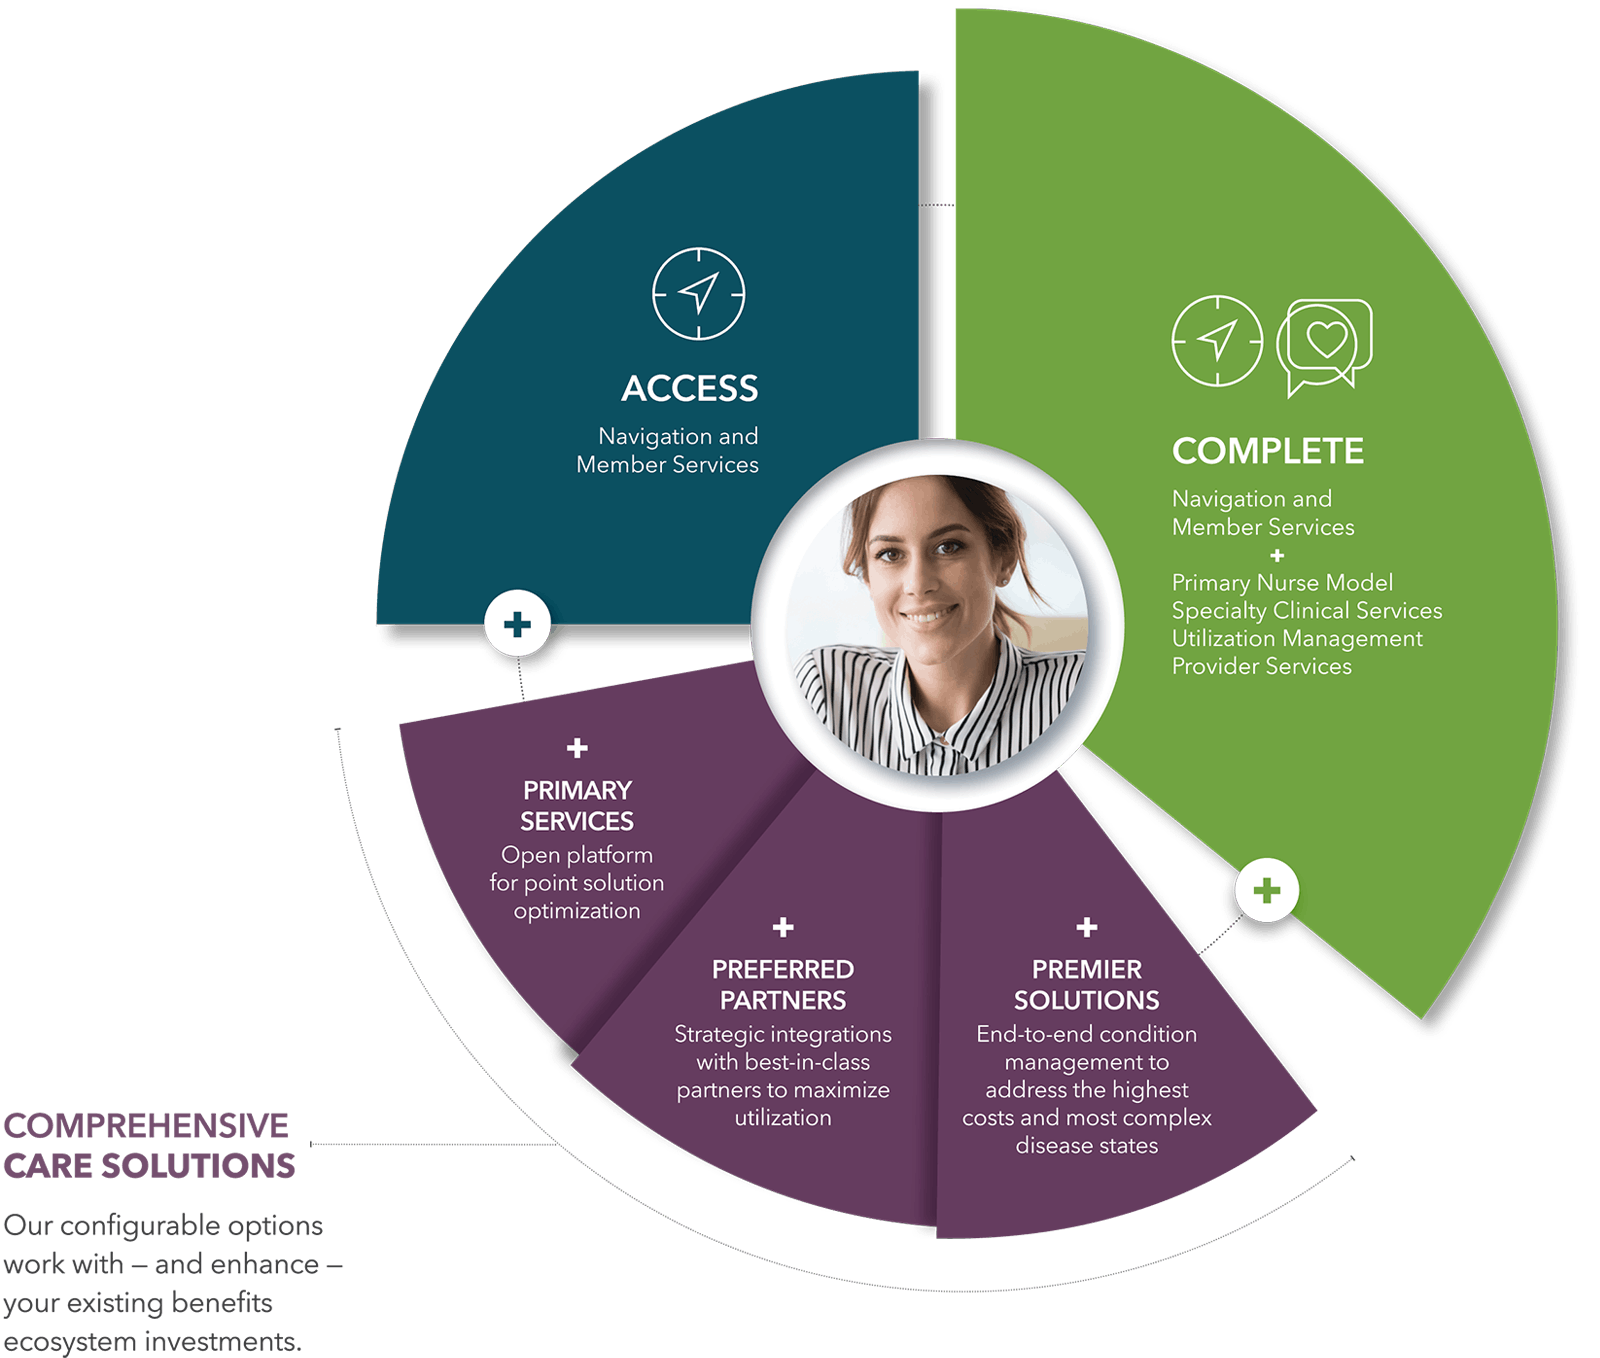 Quantum Health product offering pie chart